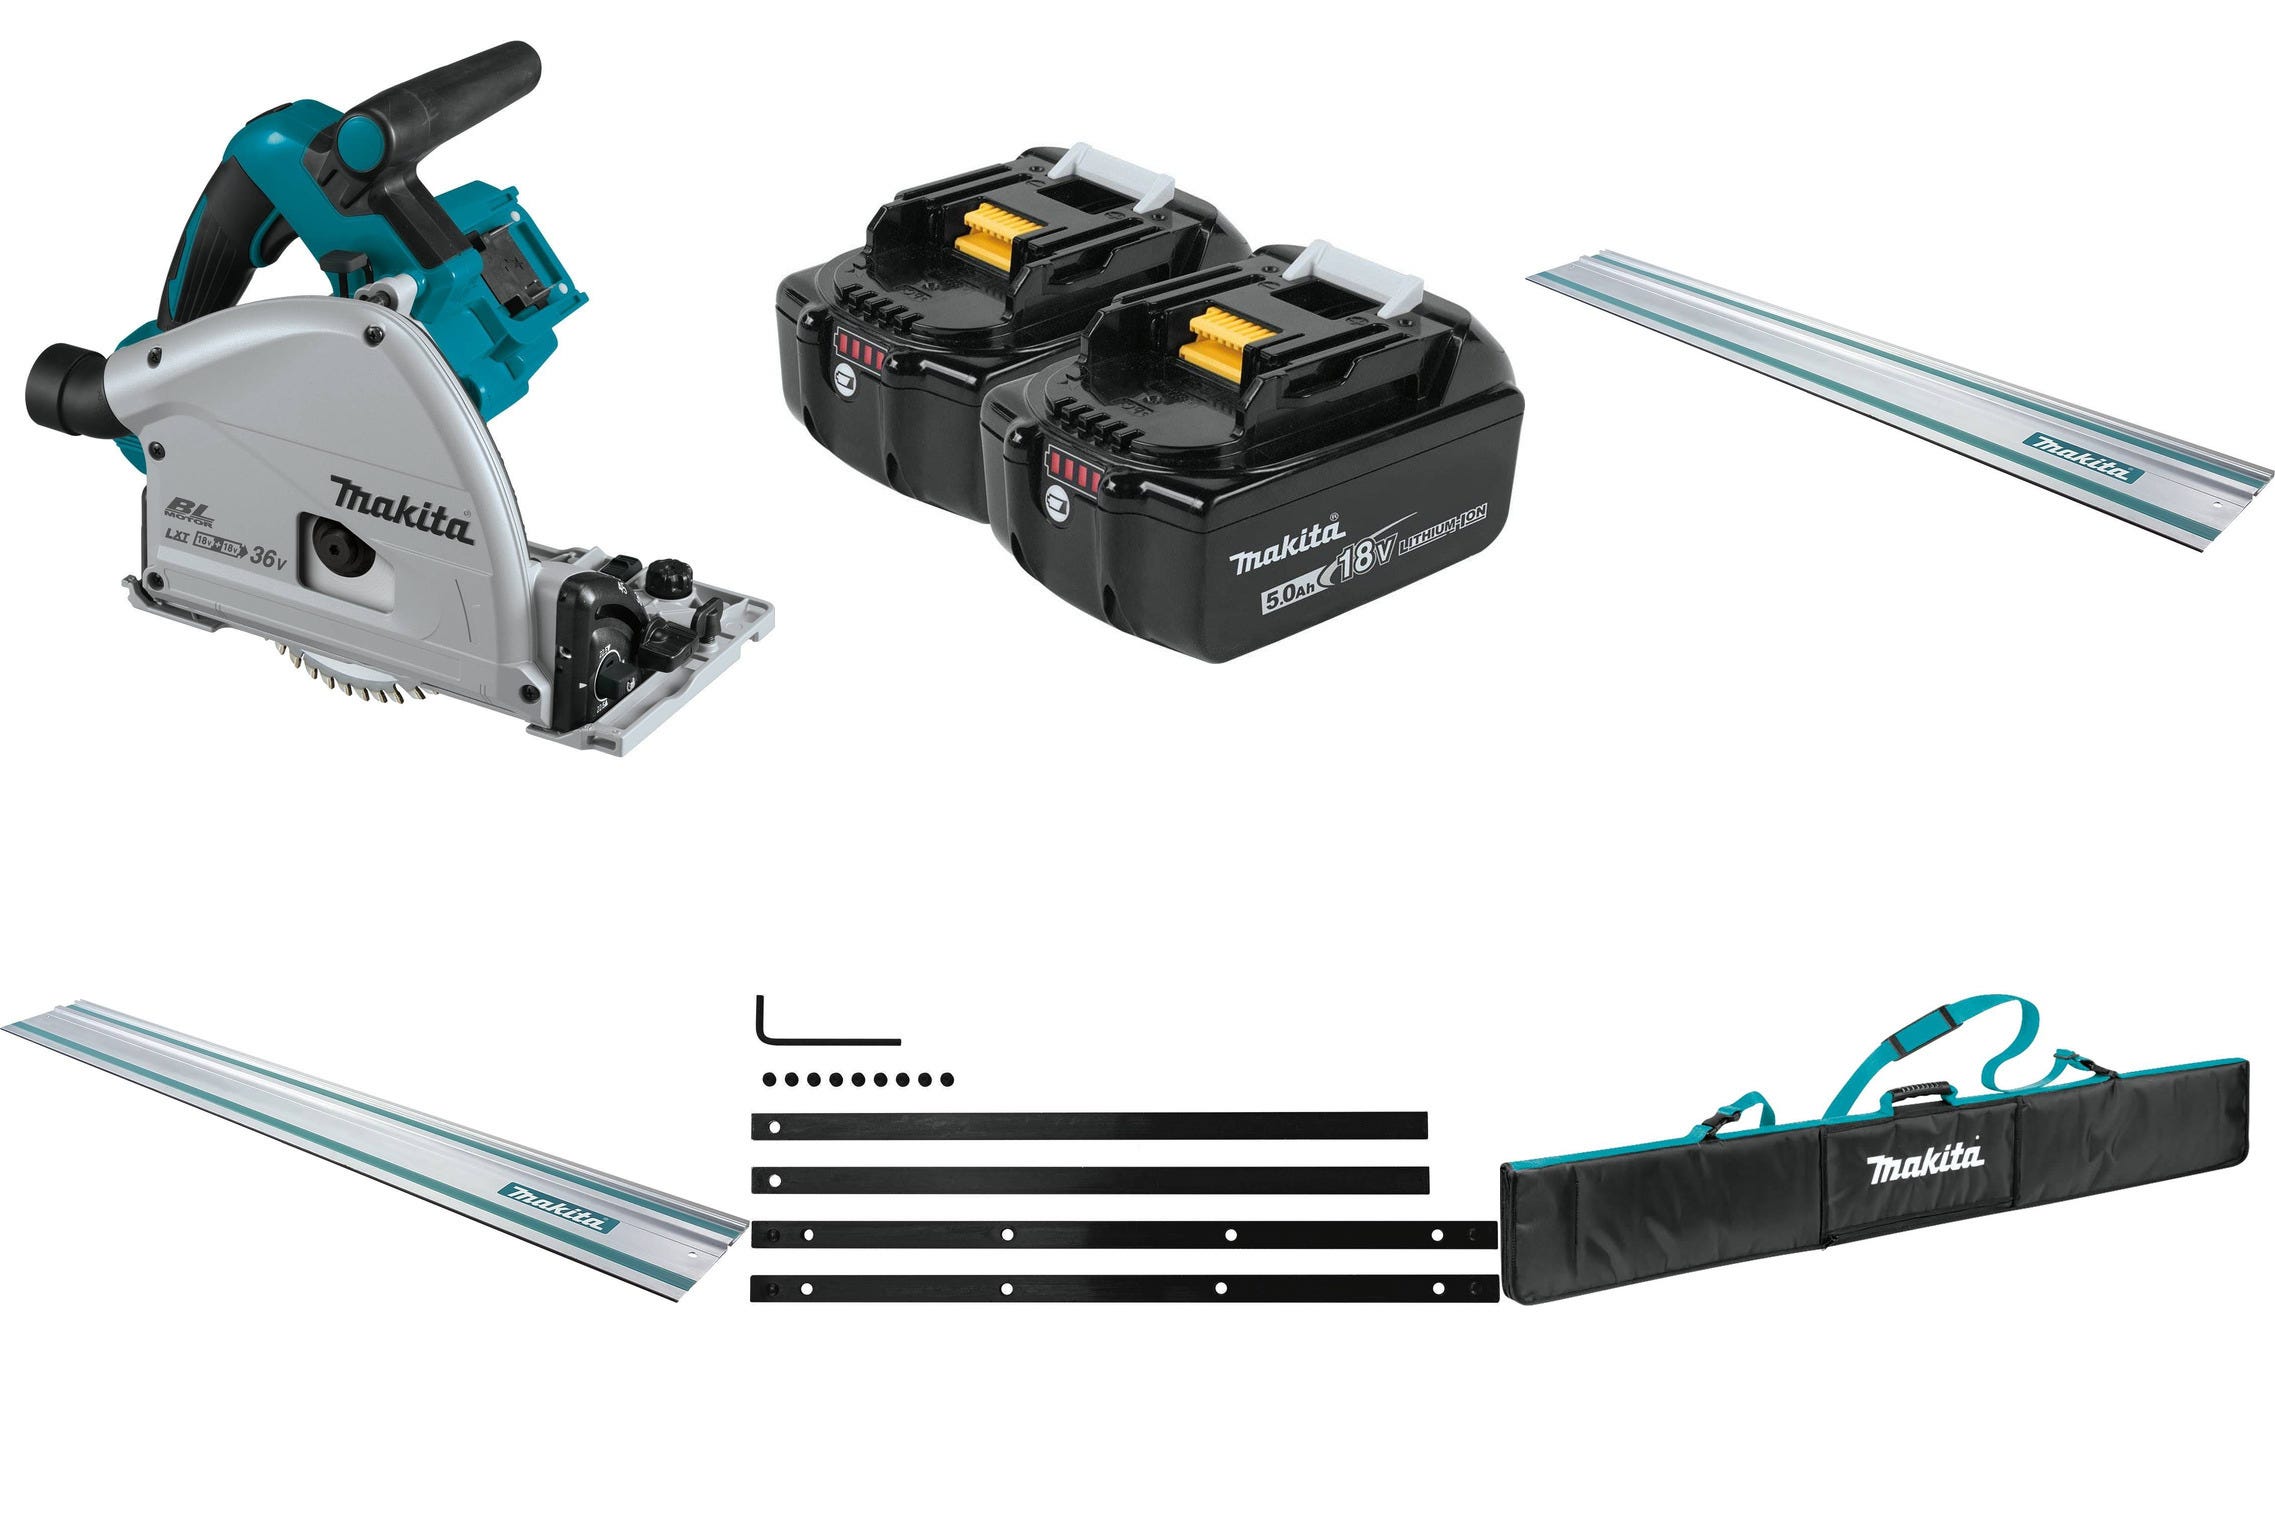 Makita Cordless Brushless 36V LXT 6-1/2" Track Saw and Accessories Bundle